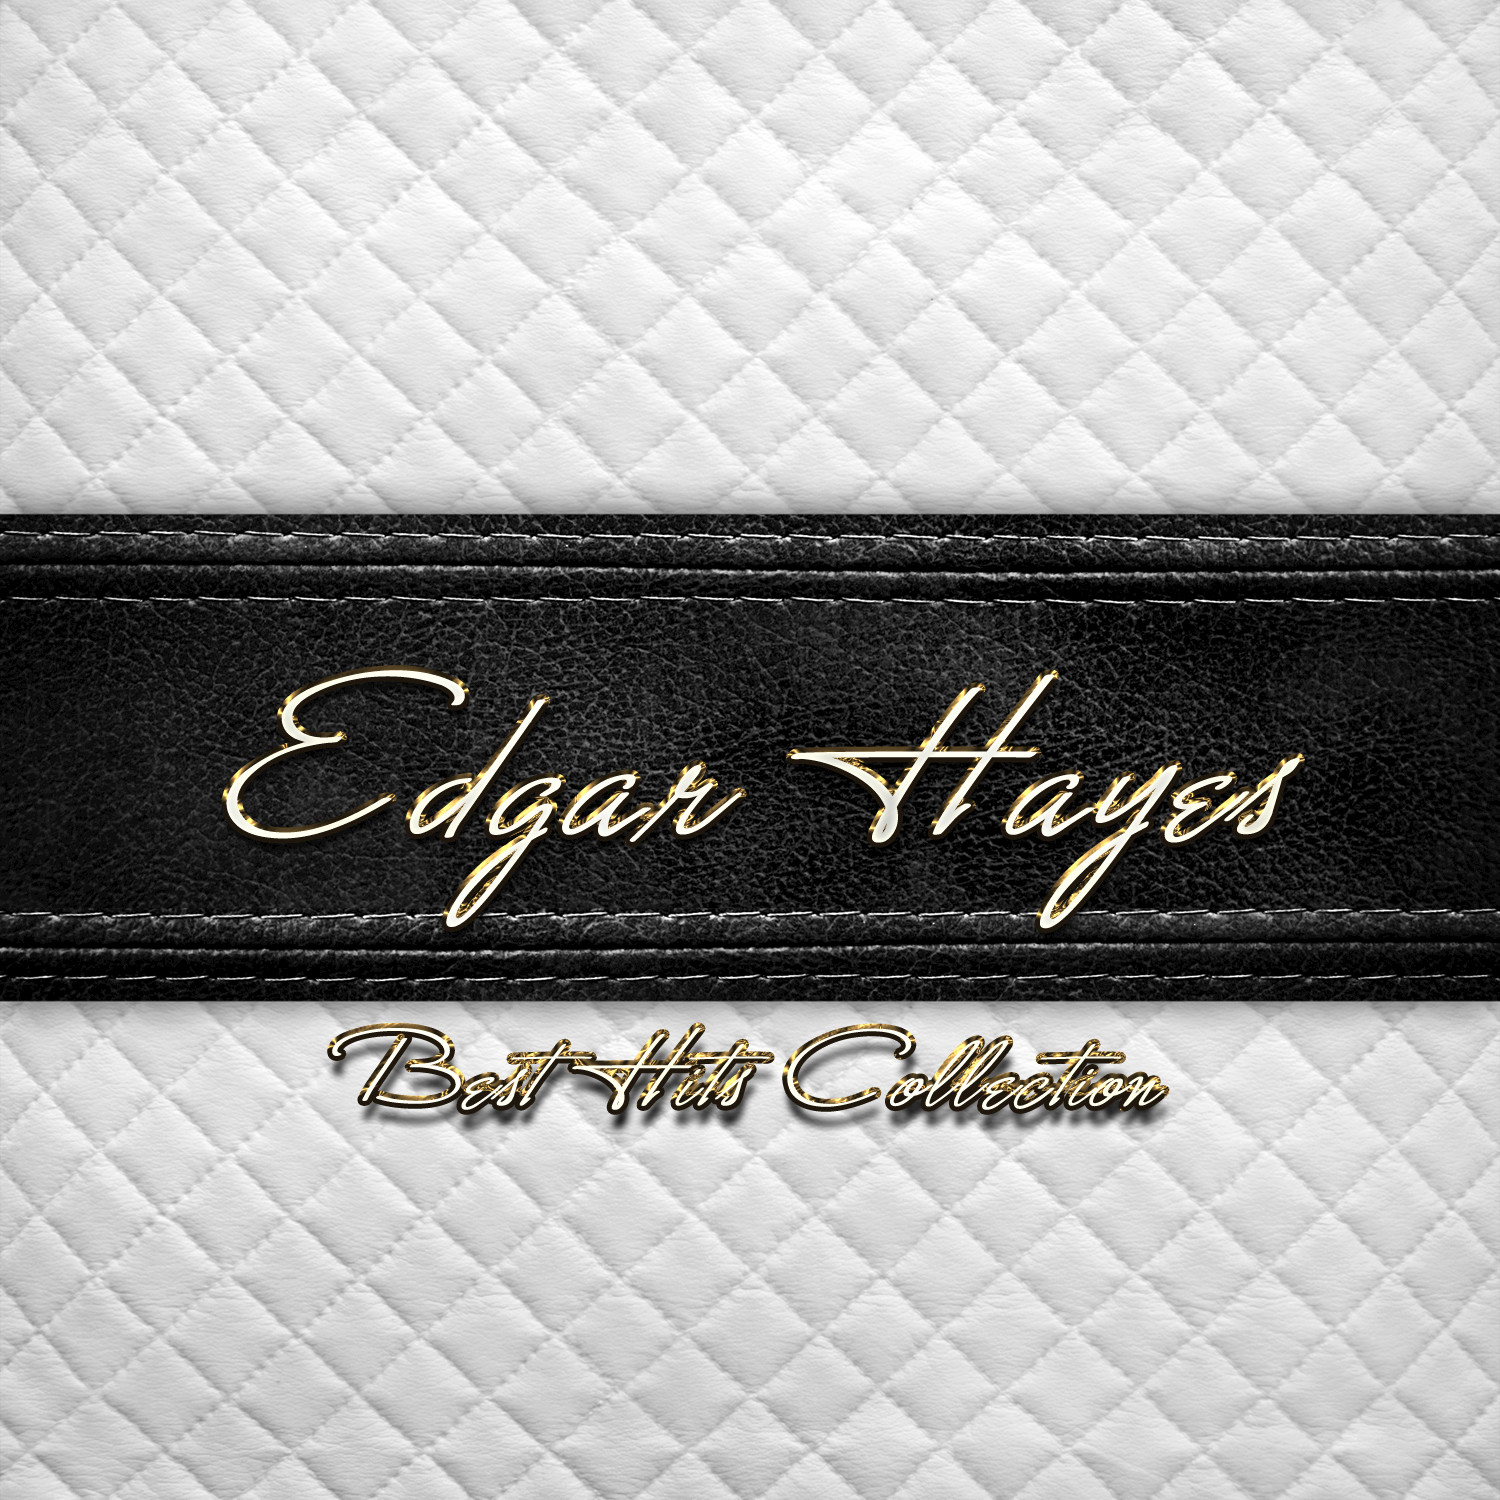 Best Hits Collection of Edgar Hayes